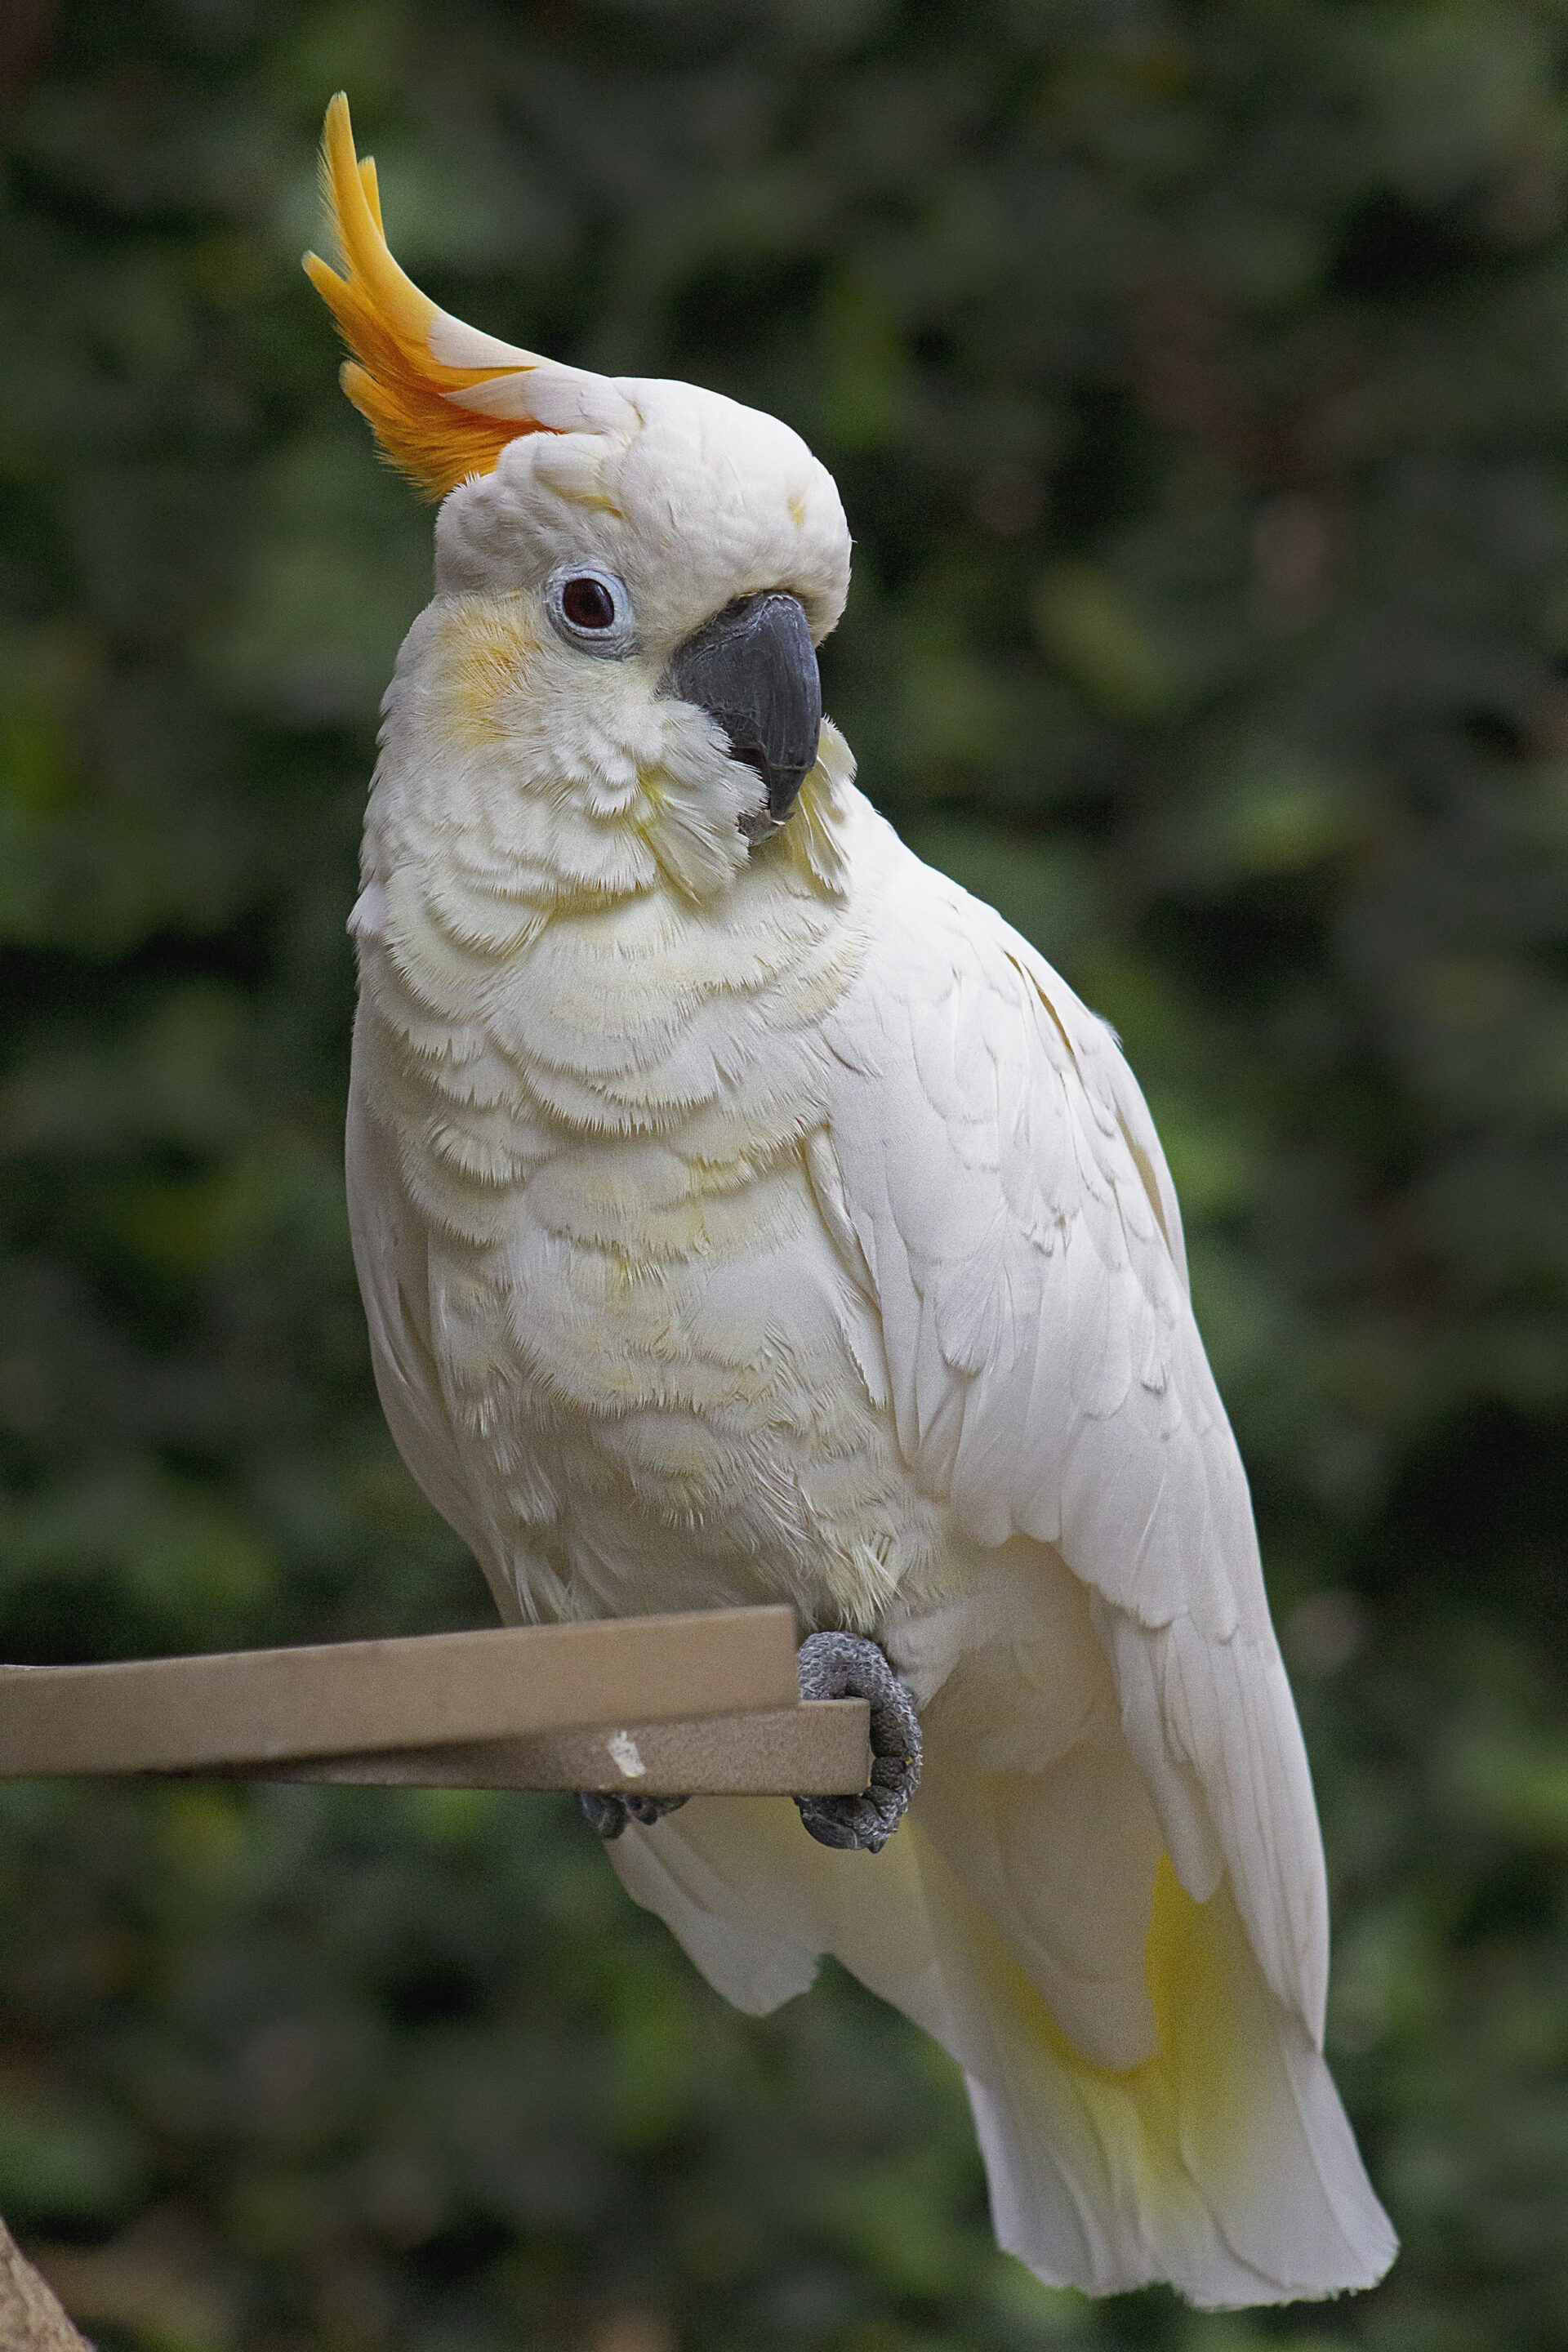 Gidget, a Citron-Crested Cockatoo at Bloedel Conservatory, March 2019